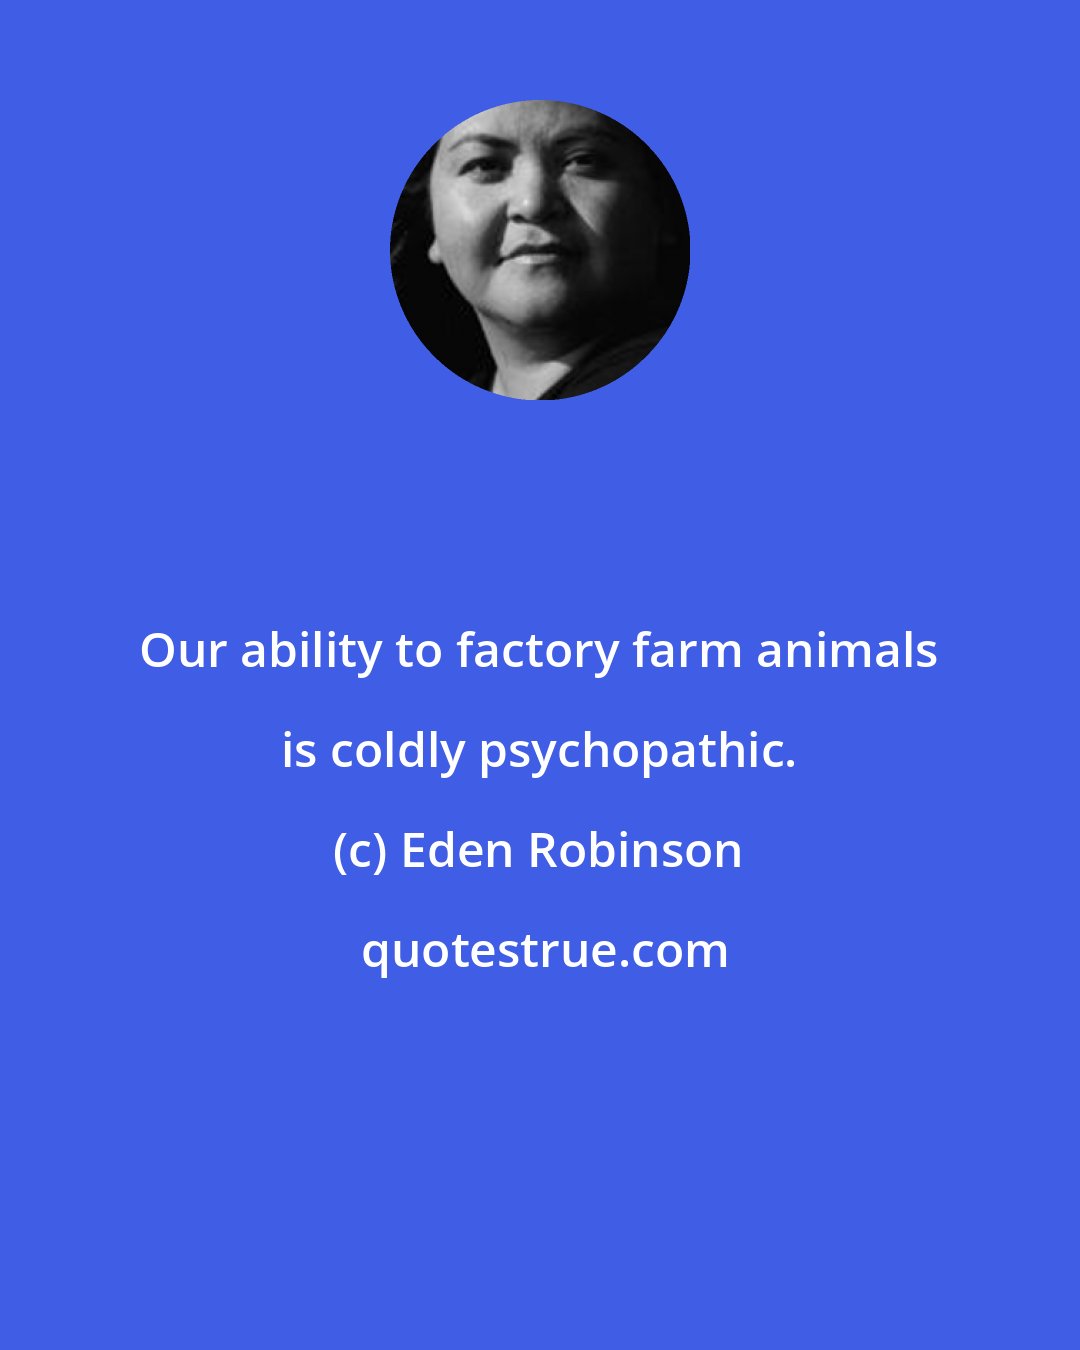 Eden Robinson: Our ability to factory farm animals is coldly psychopathic.